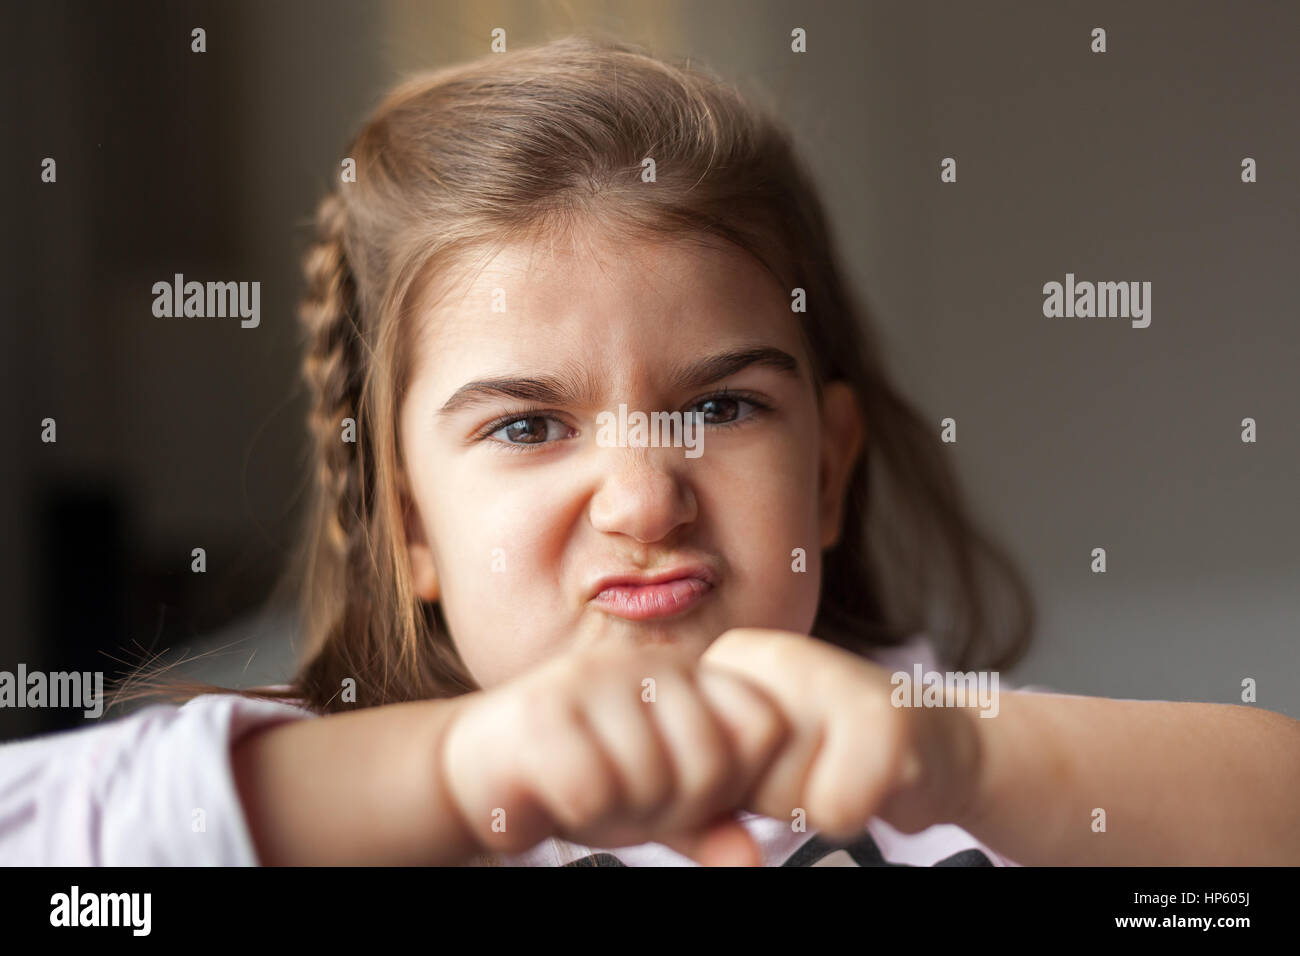 girl with a silly expression Stock Photo